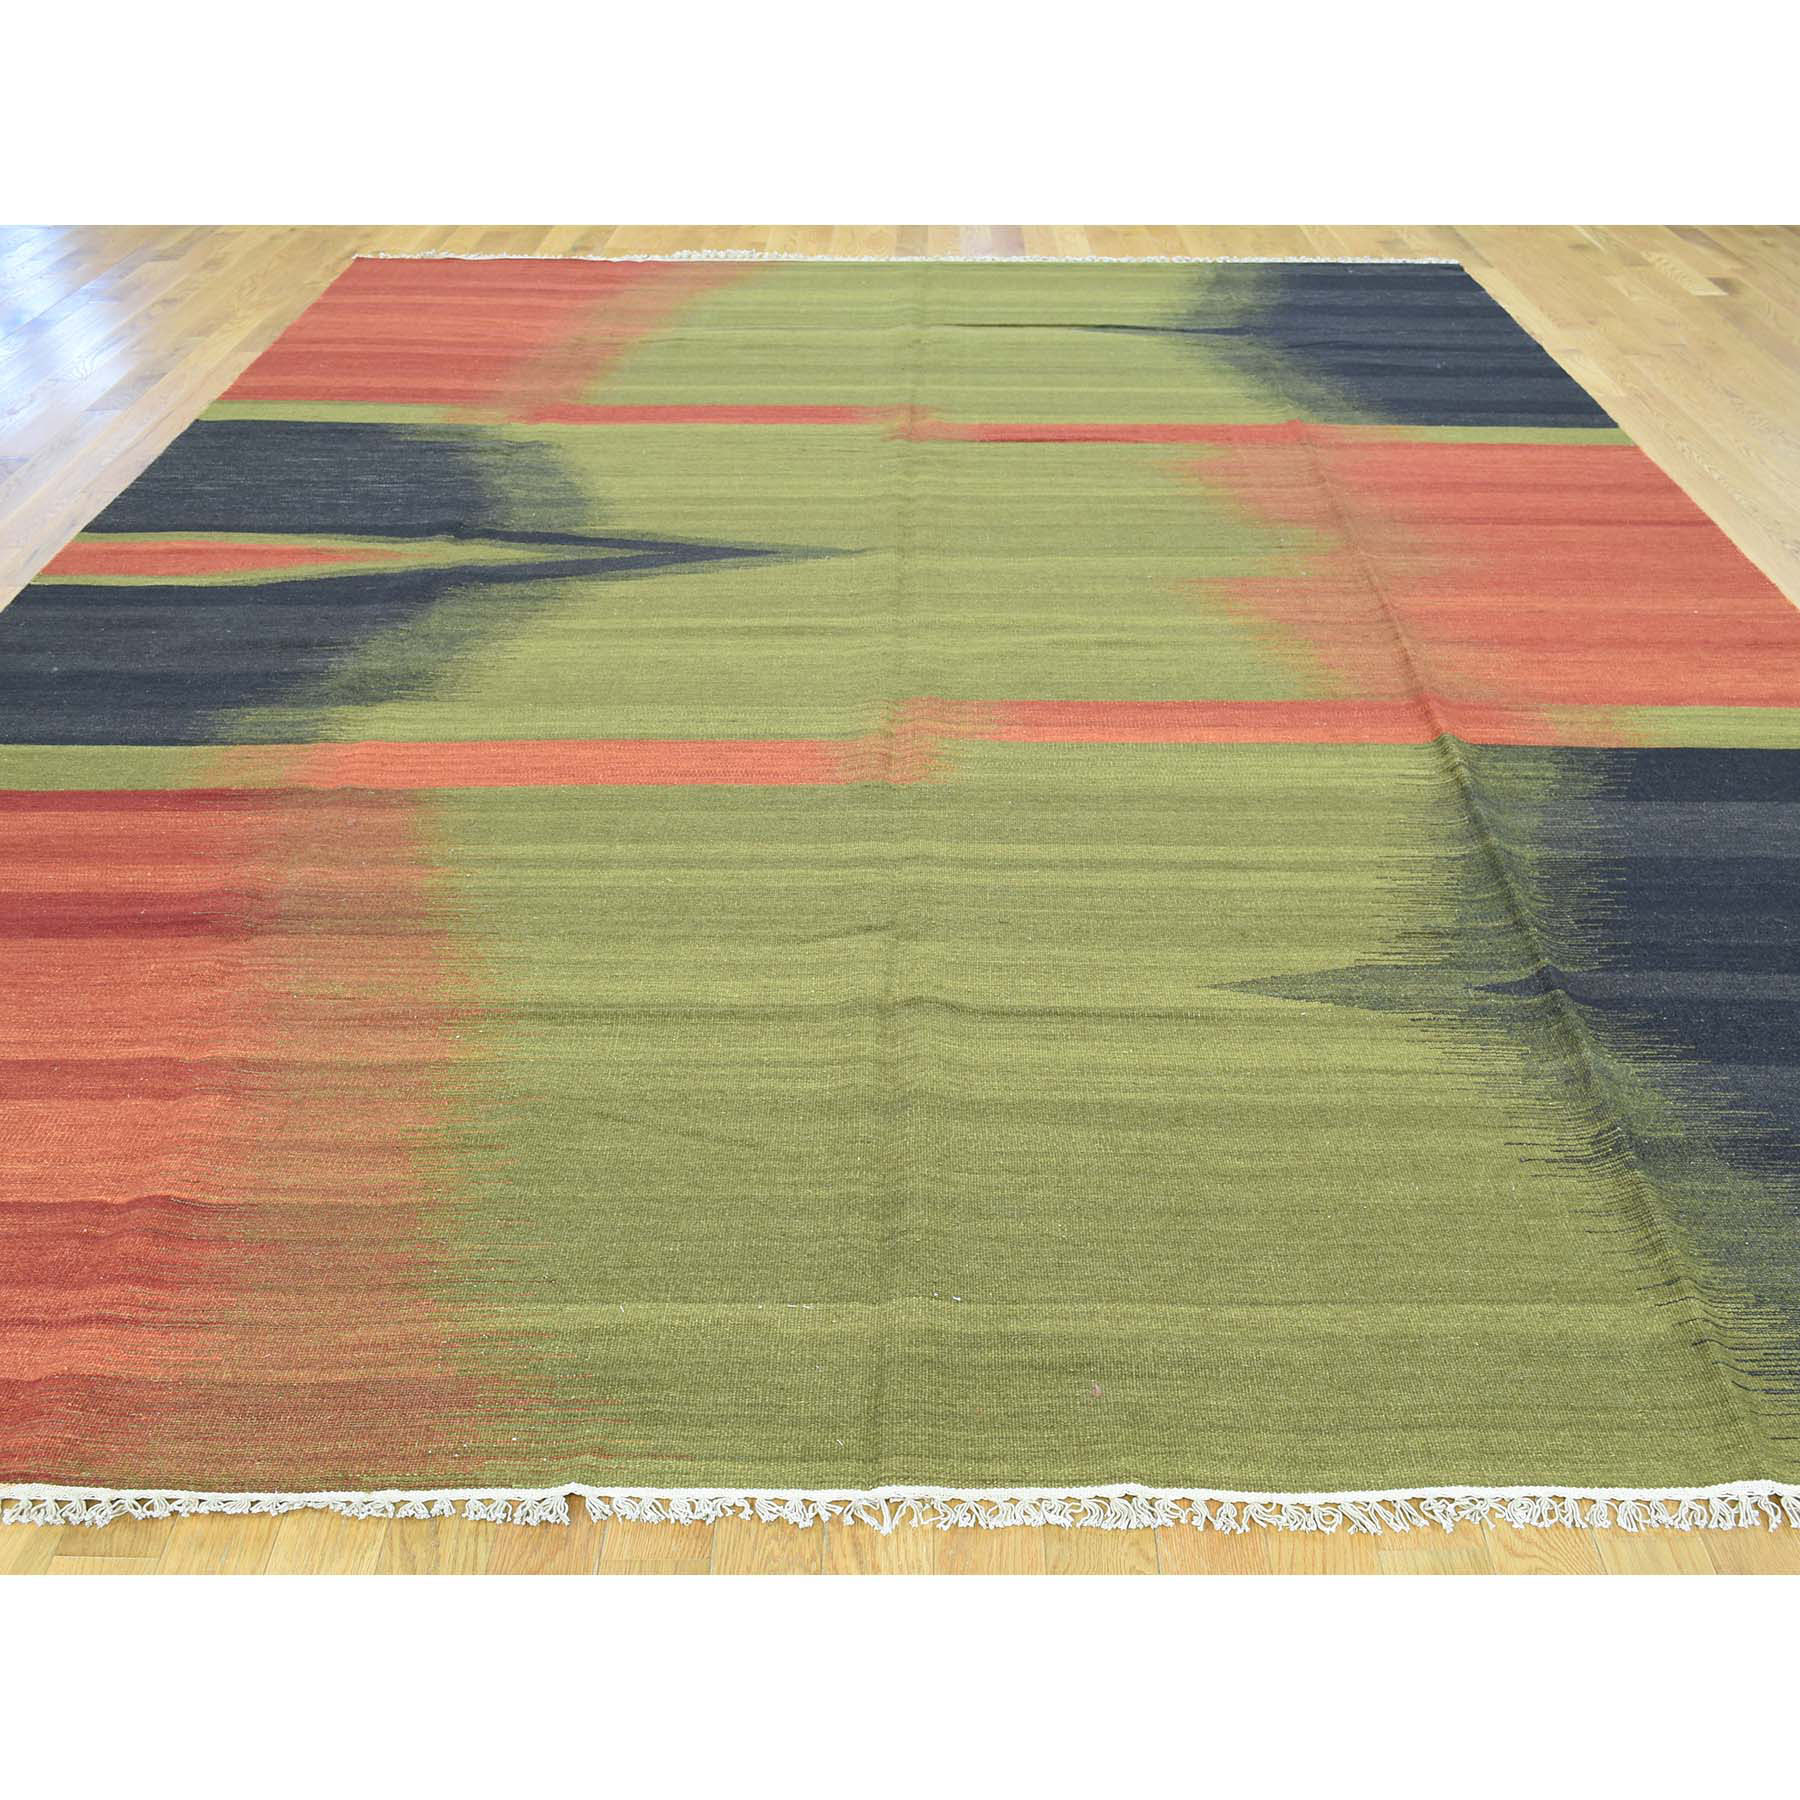 9-1 x12-4  Hand-Woven Colorful Durie Kilim Flat Weave Pure Wool Carpet 